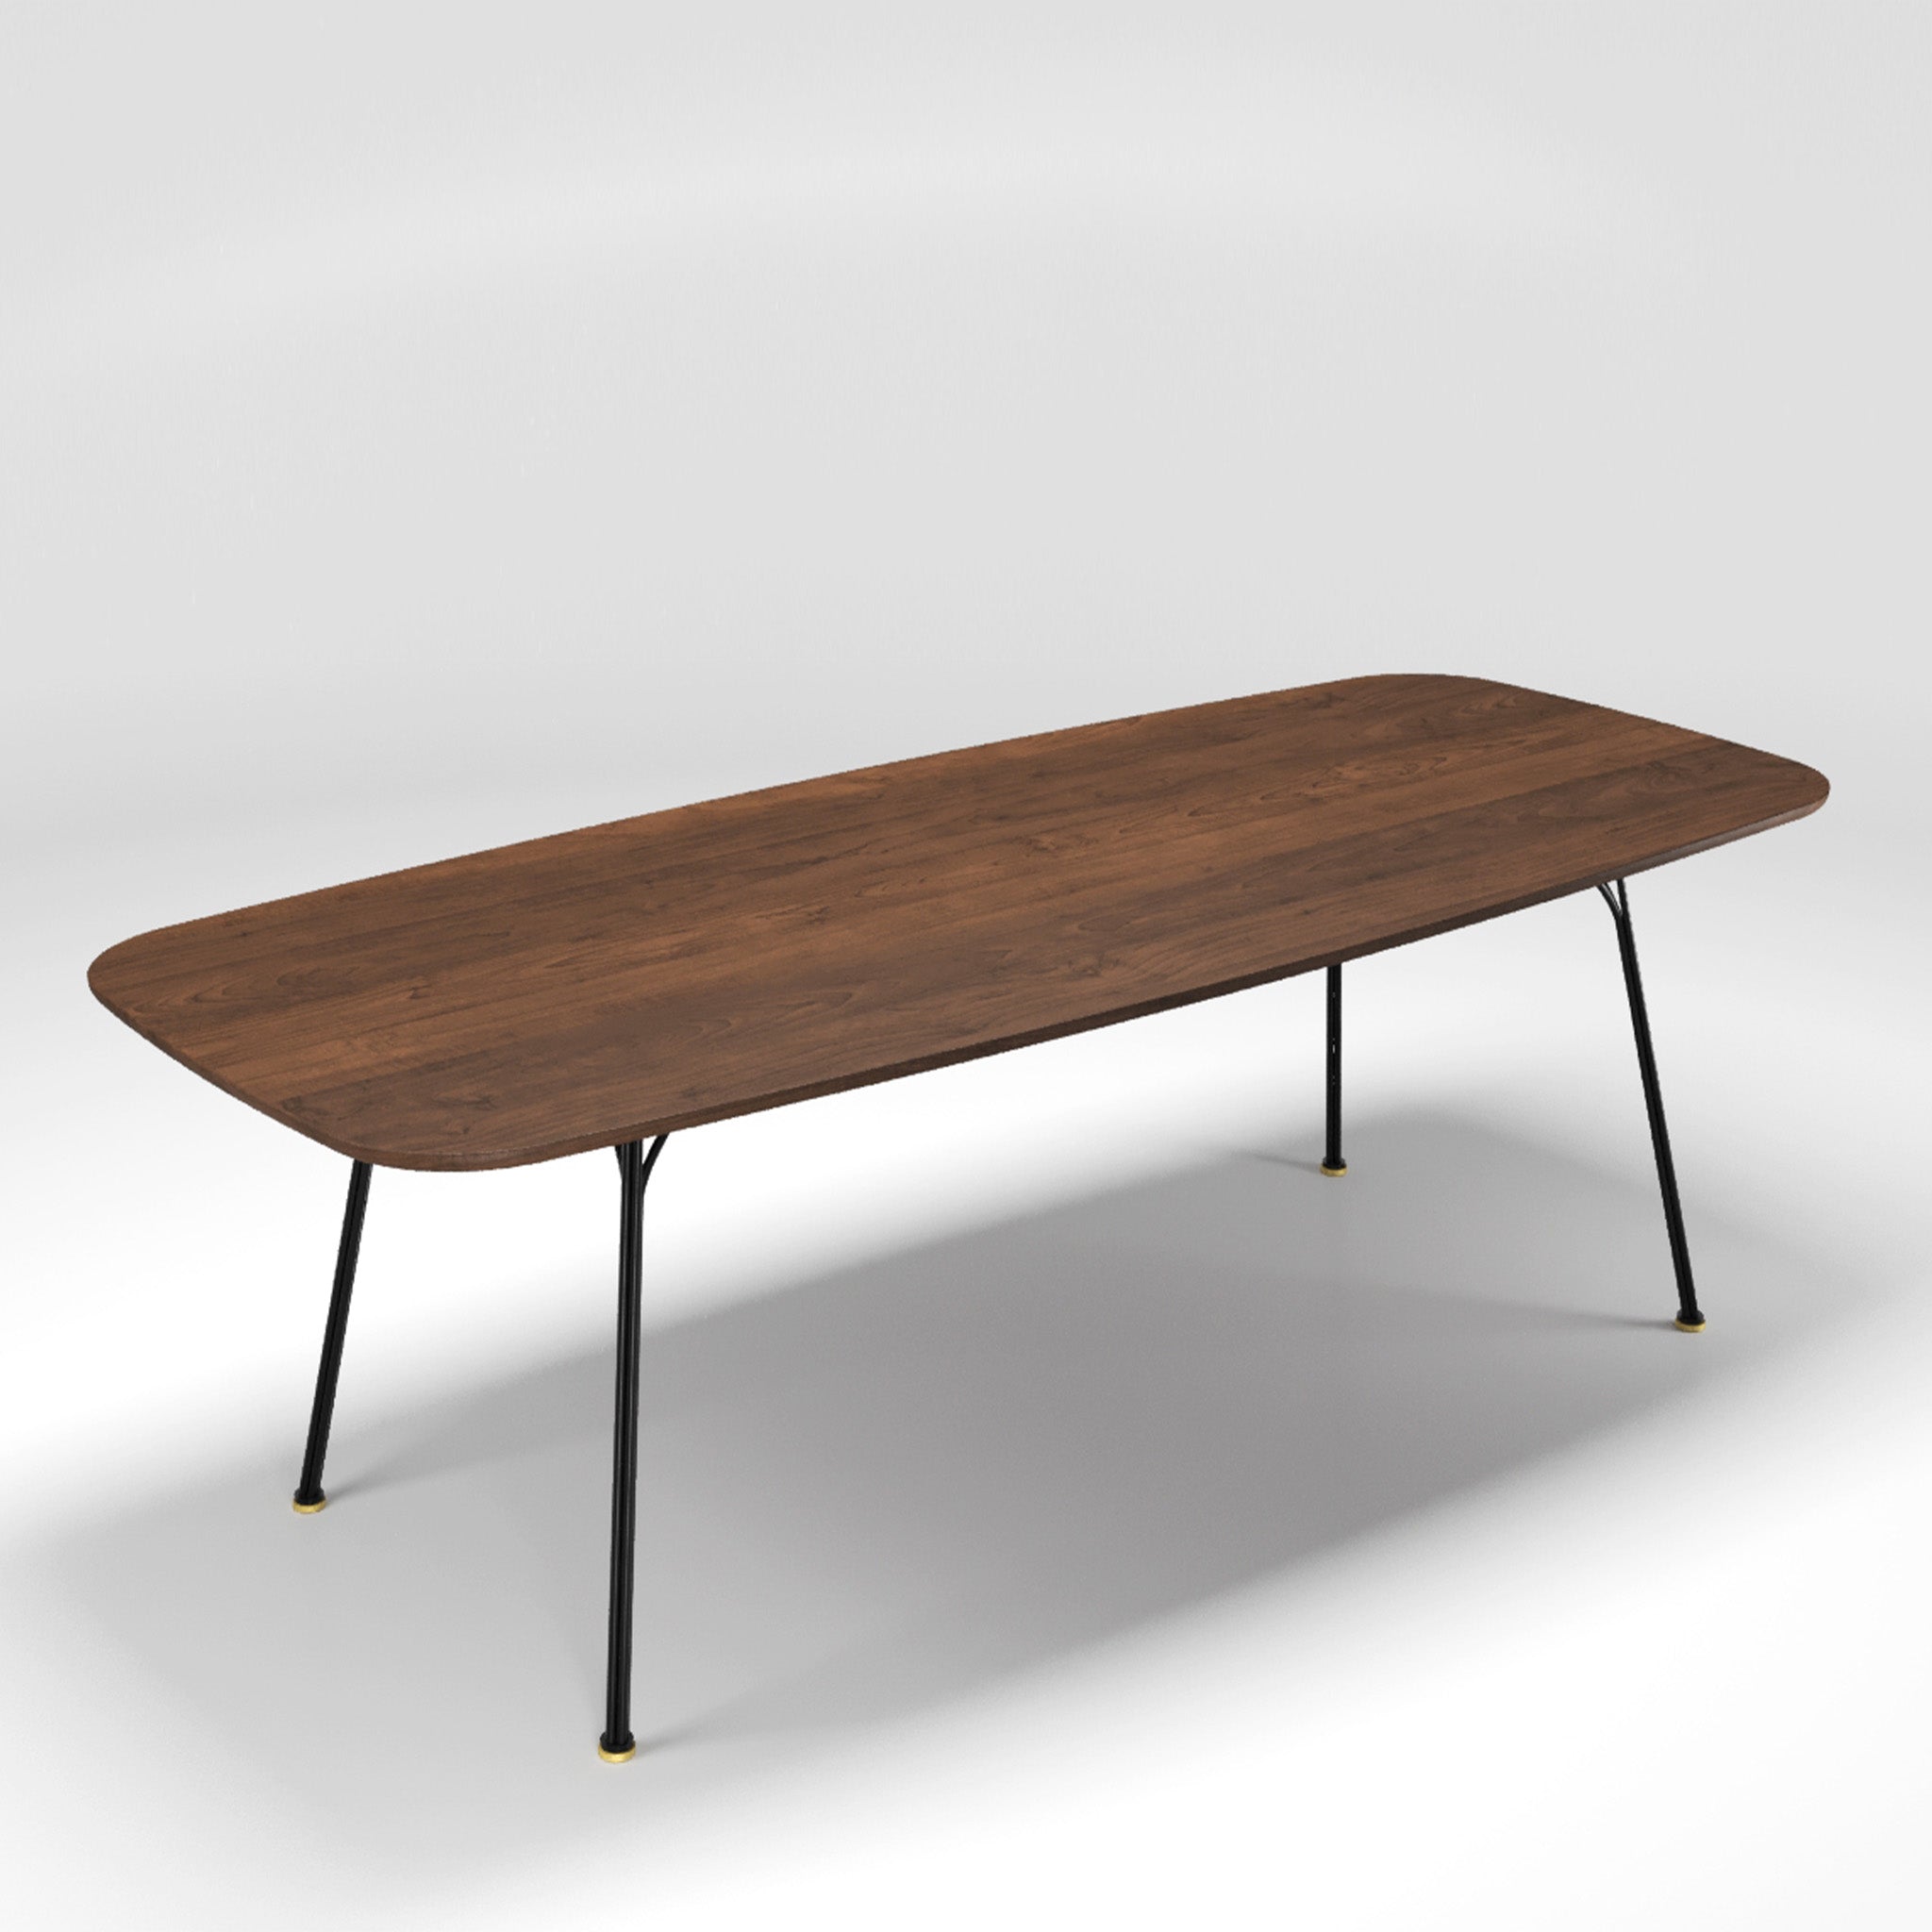 Corduroy Table #2 by Christian Troels for Dk3